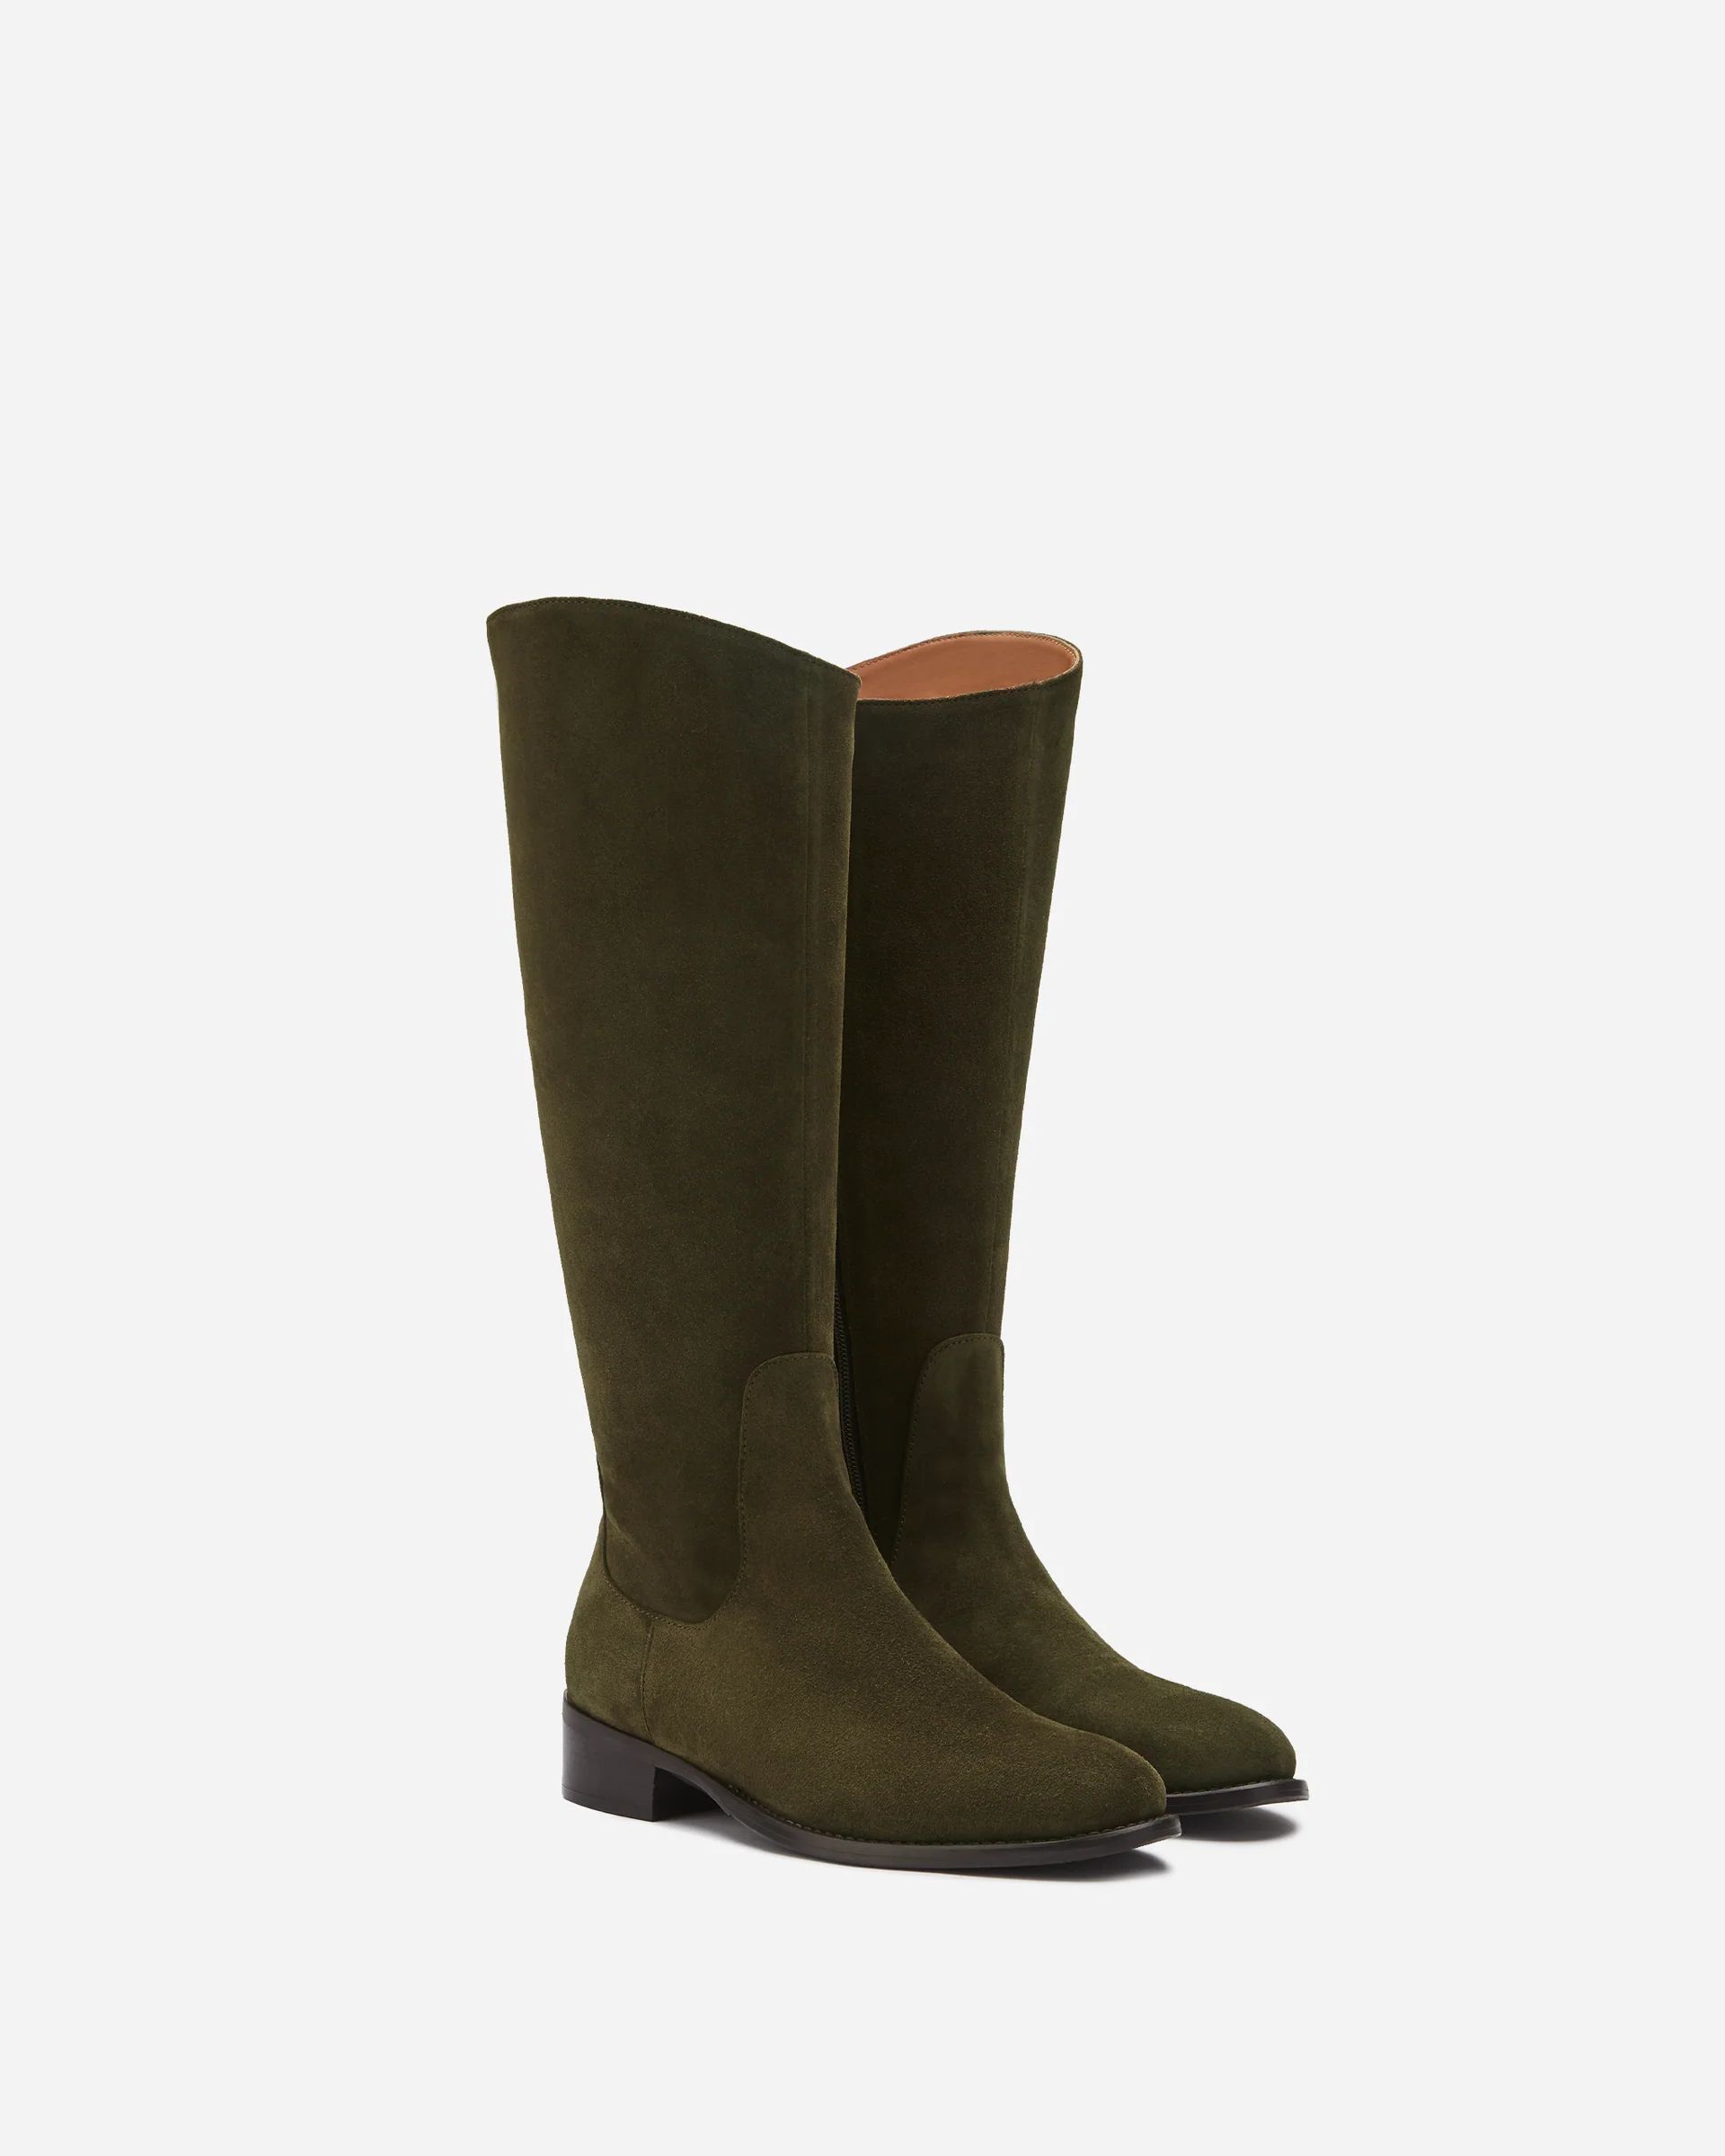 Verity Knee High Boots in Forest Green Suede | DuoBoots